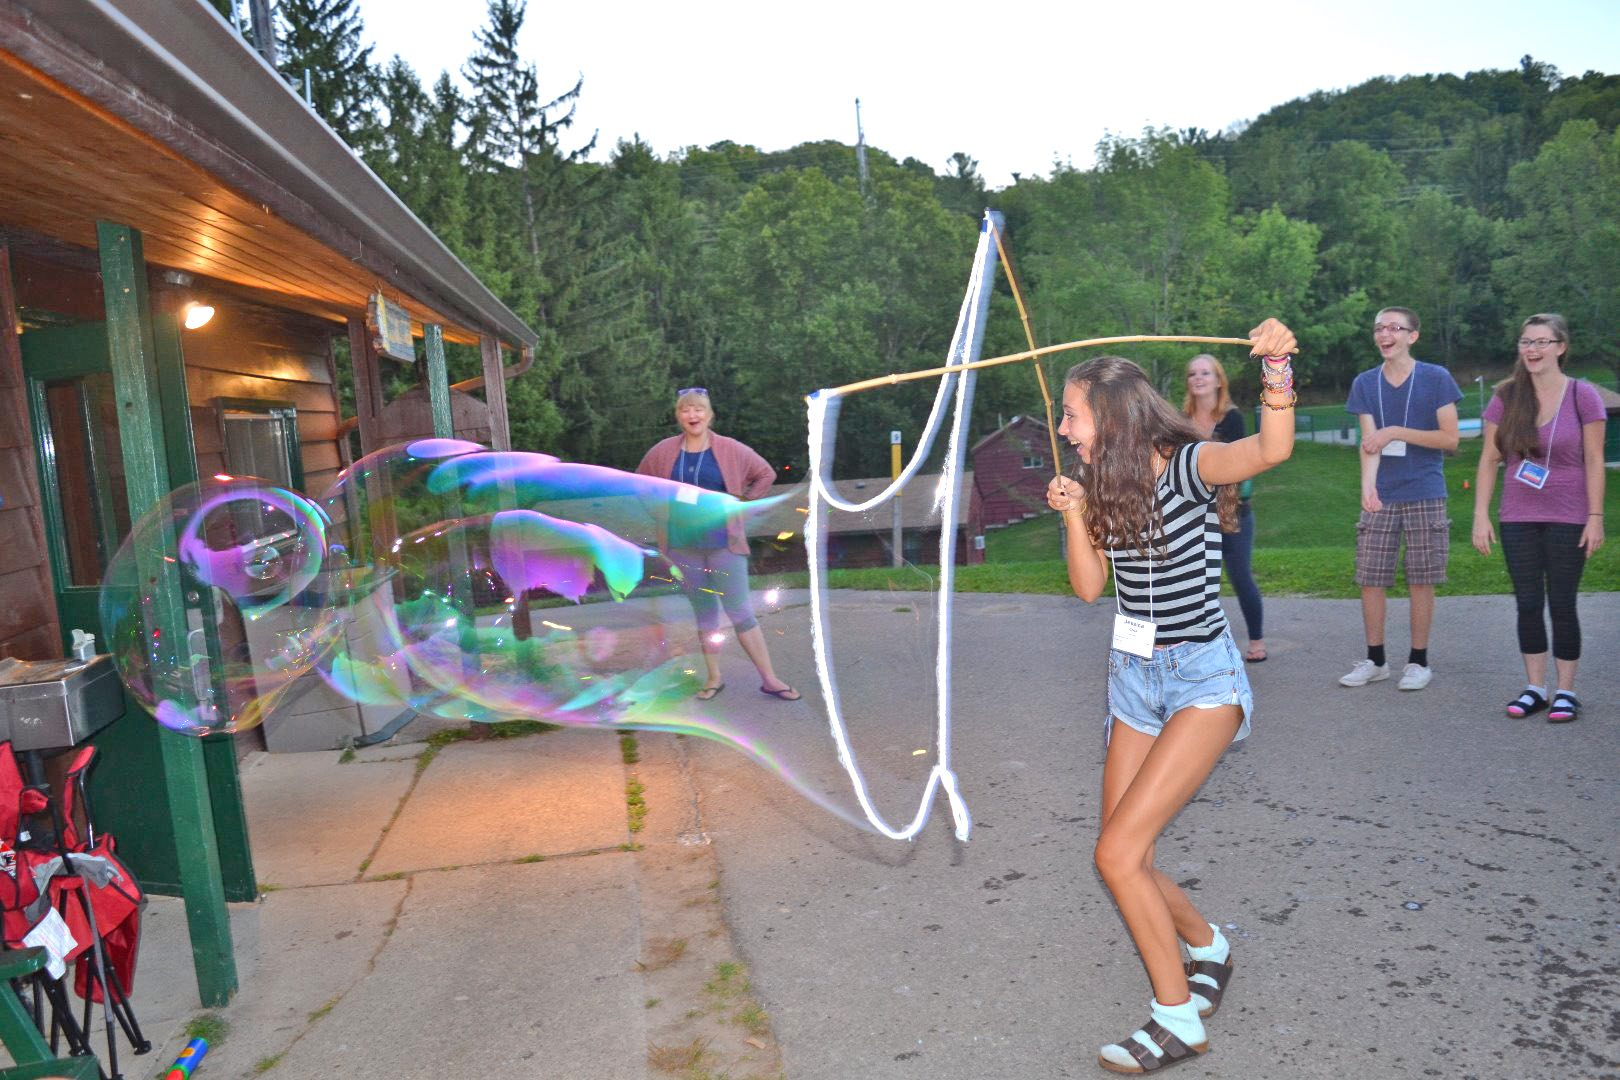 Making giant bubbles: the young people had fun seeing who could get the largest bubble. Photo: diocesan website